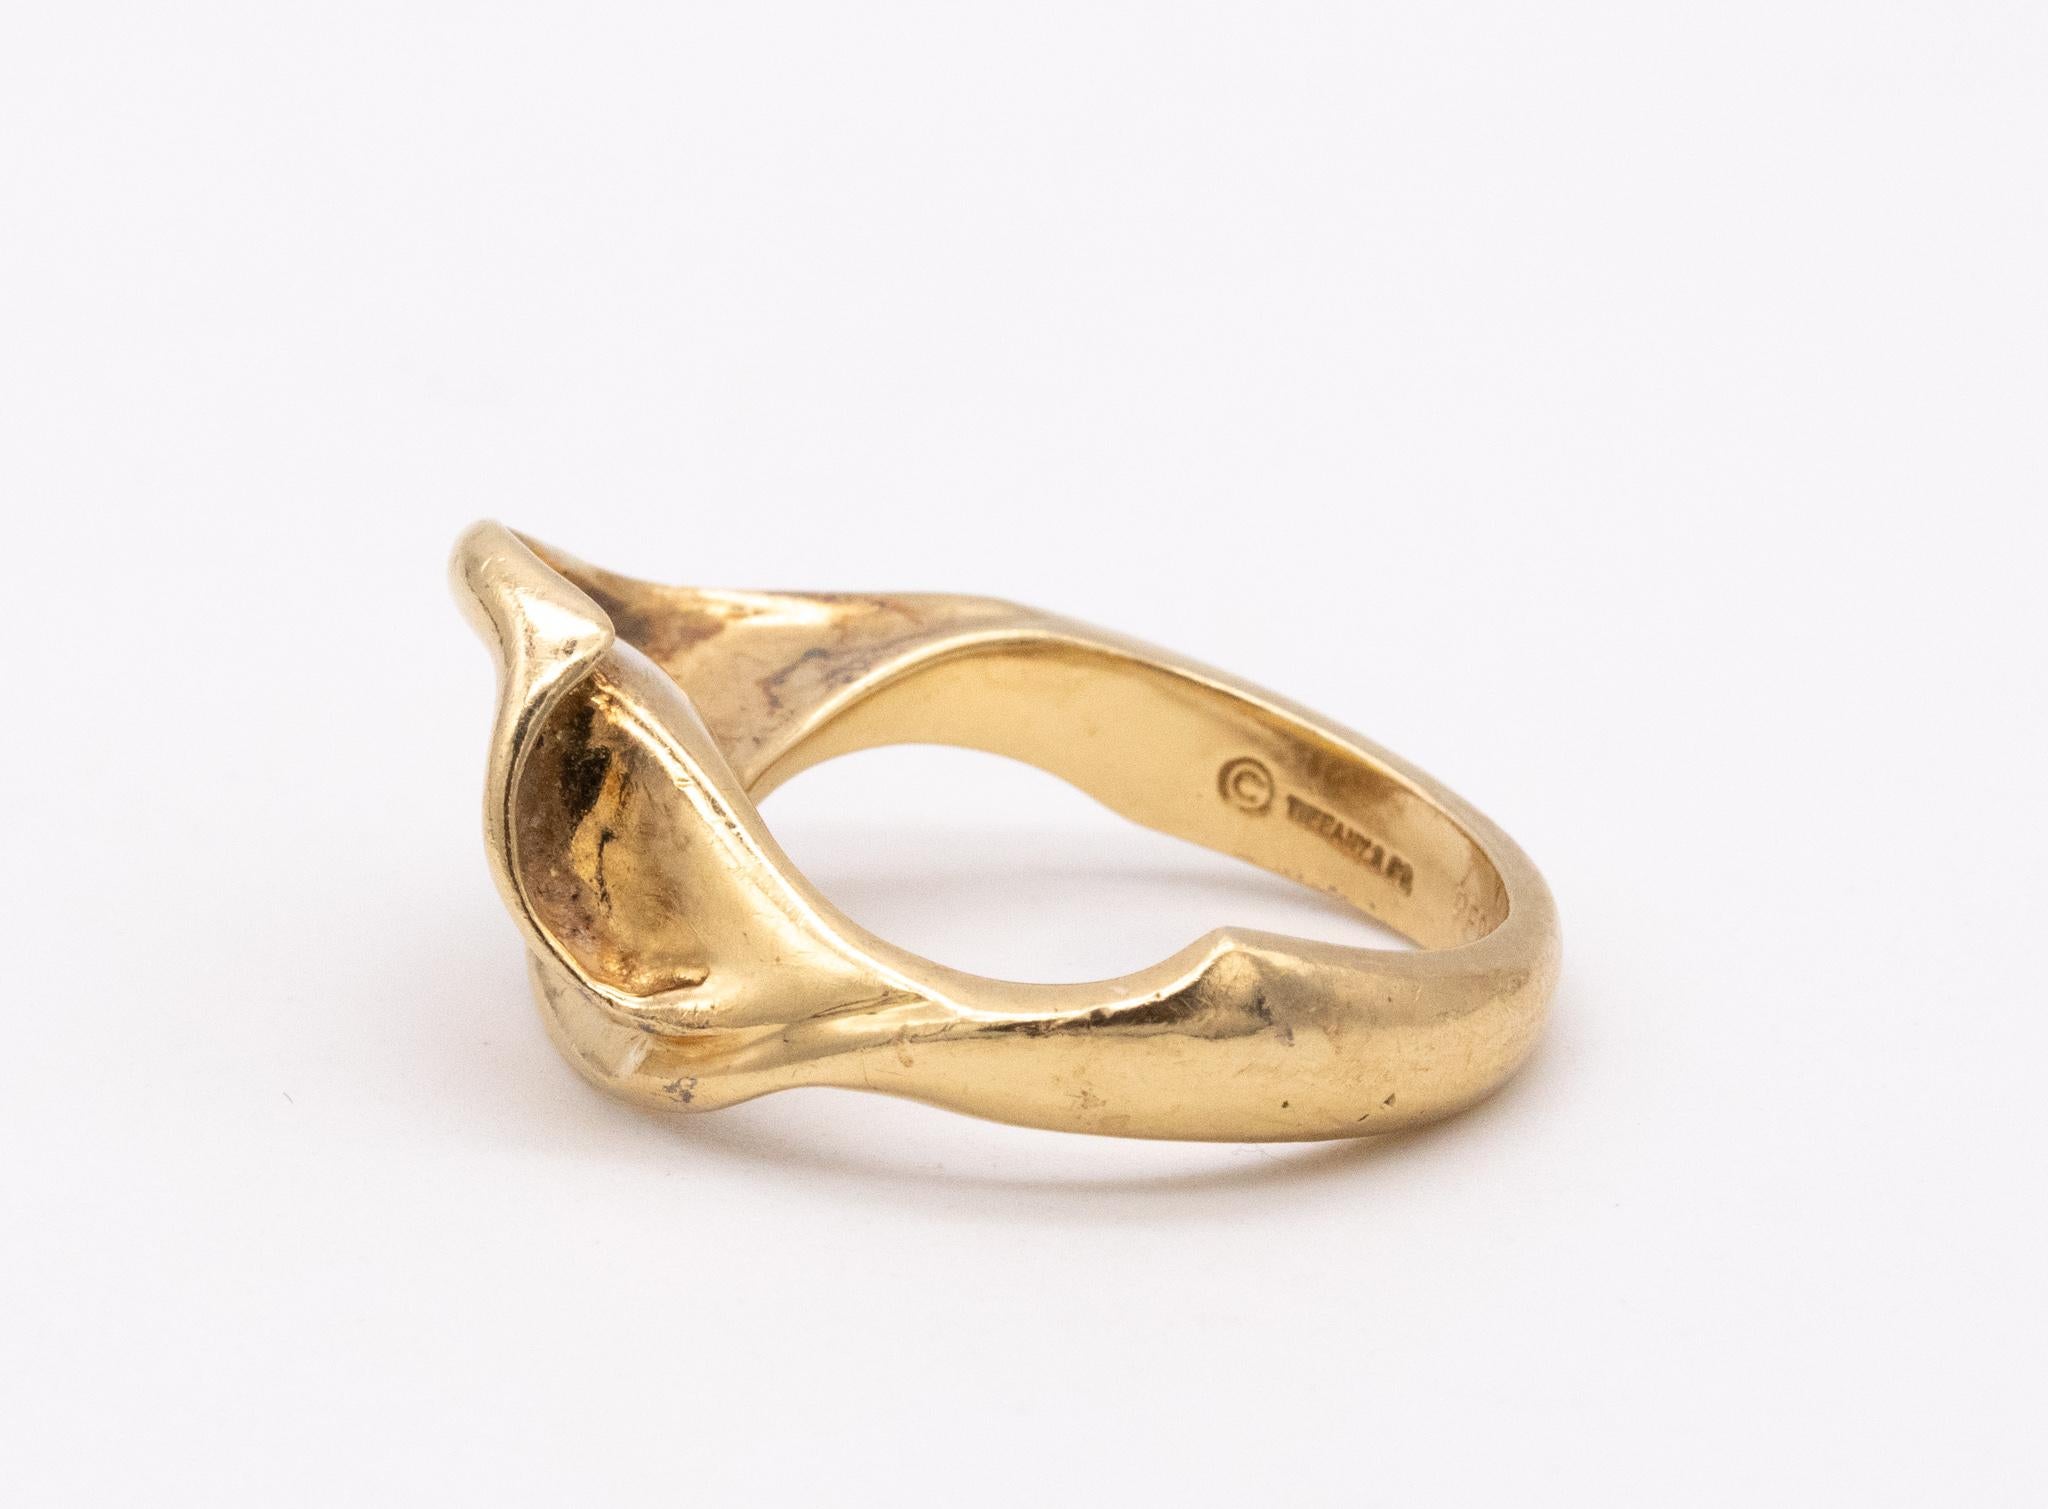 Tiffany Co. 1980 by Elsa Peretti Sculptural Calla Lily Ring in 18Kt Yellow Gold In Excellent Condition For Sale In Miami, FL